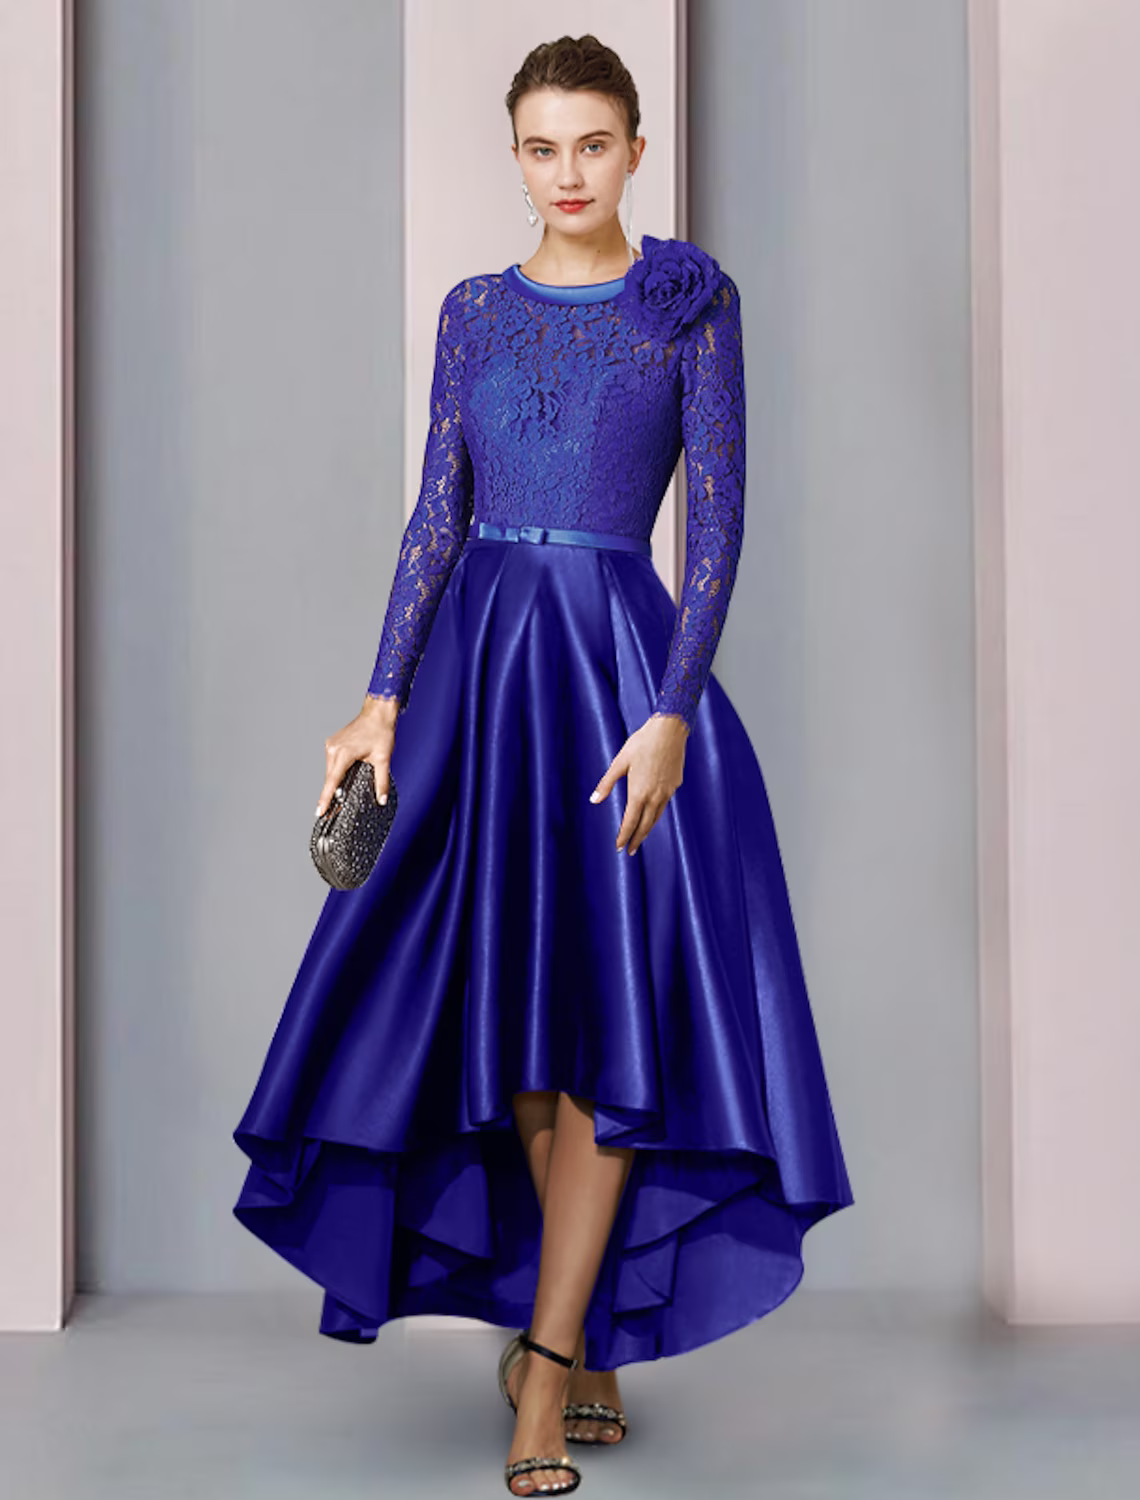 A-Line Mother of the Bride Dress Formal Church Elegant High Low Scoop Neck Satin Lace Long Sleeve with Bow Flower